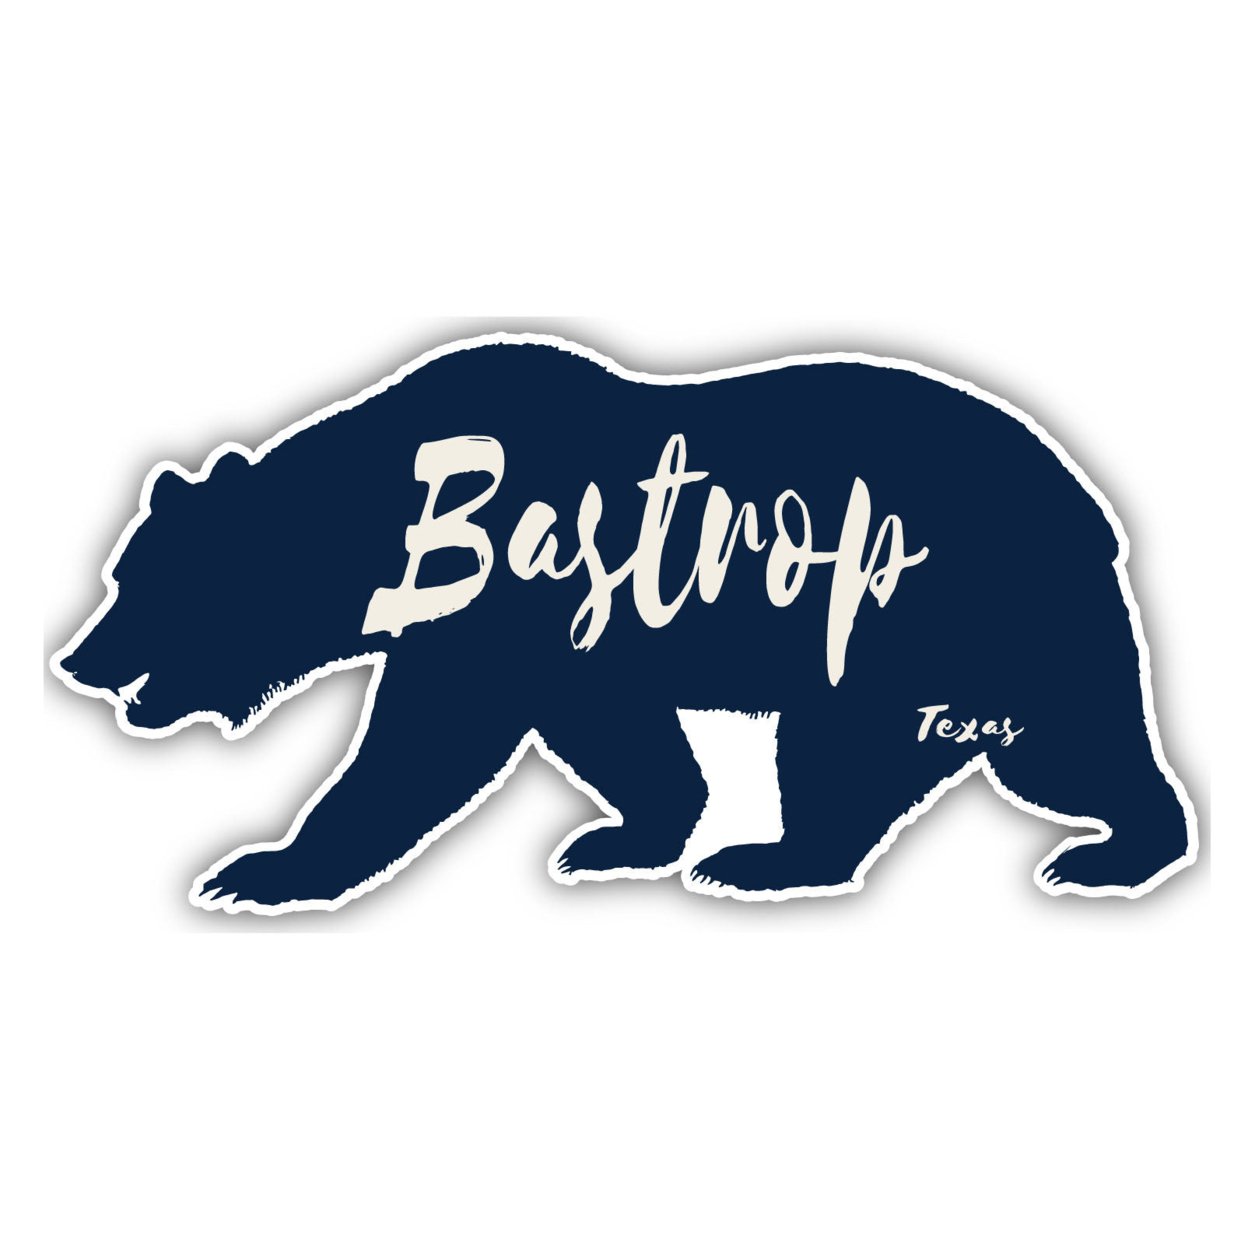 Bastrop Texas Souvenir Decorative Stickers (Choose Theme And Size) - 4-Pack, 12-Inch, Bear